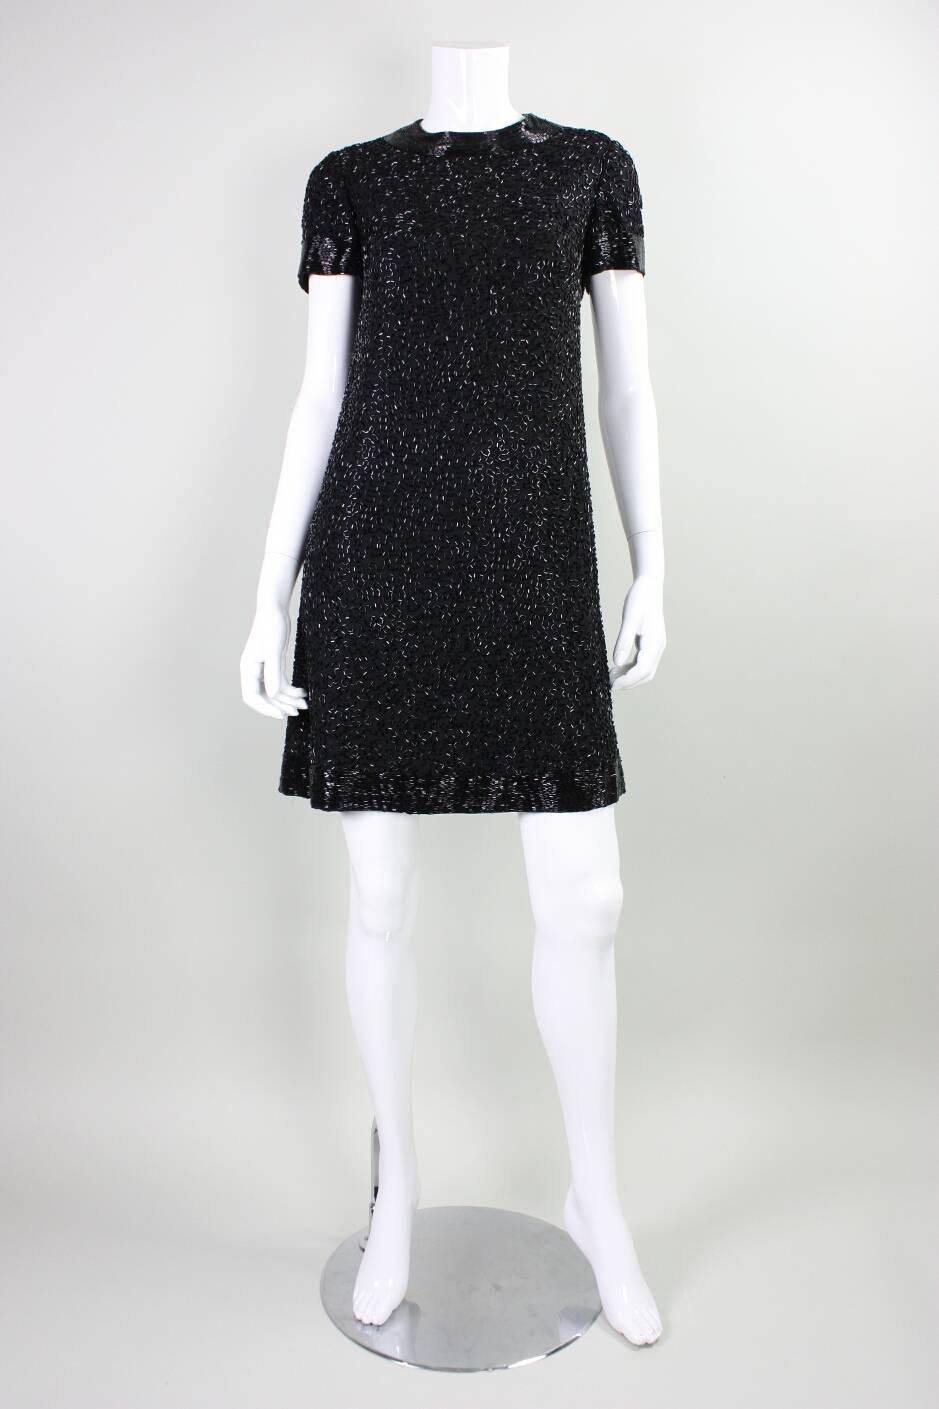 Vintage cocktail dress by Larrry Aldrich dates to the 1960's and retailed at Doris Scott.  It made of black crepe that is adorned with black bugle beads in a squiggle pattern throughout.  Round neck and short sleeves.  Center back zipper.  Fully